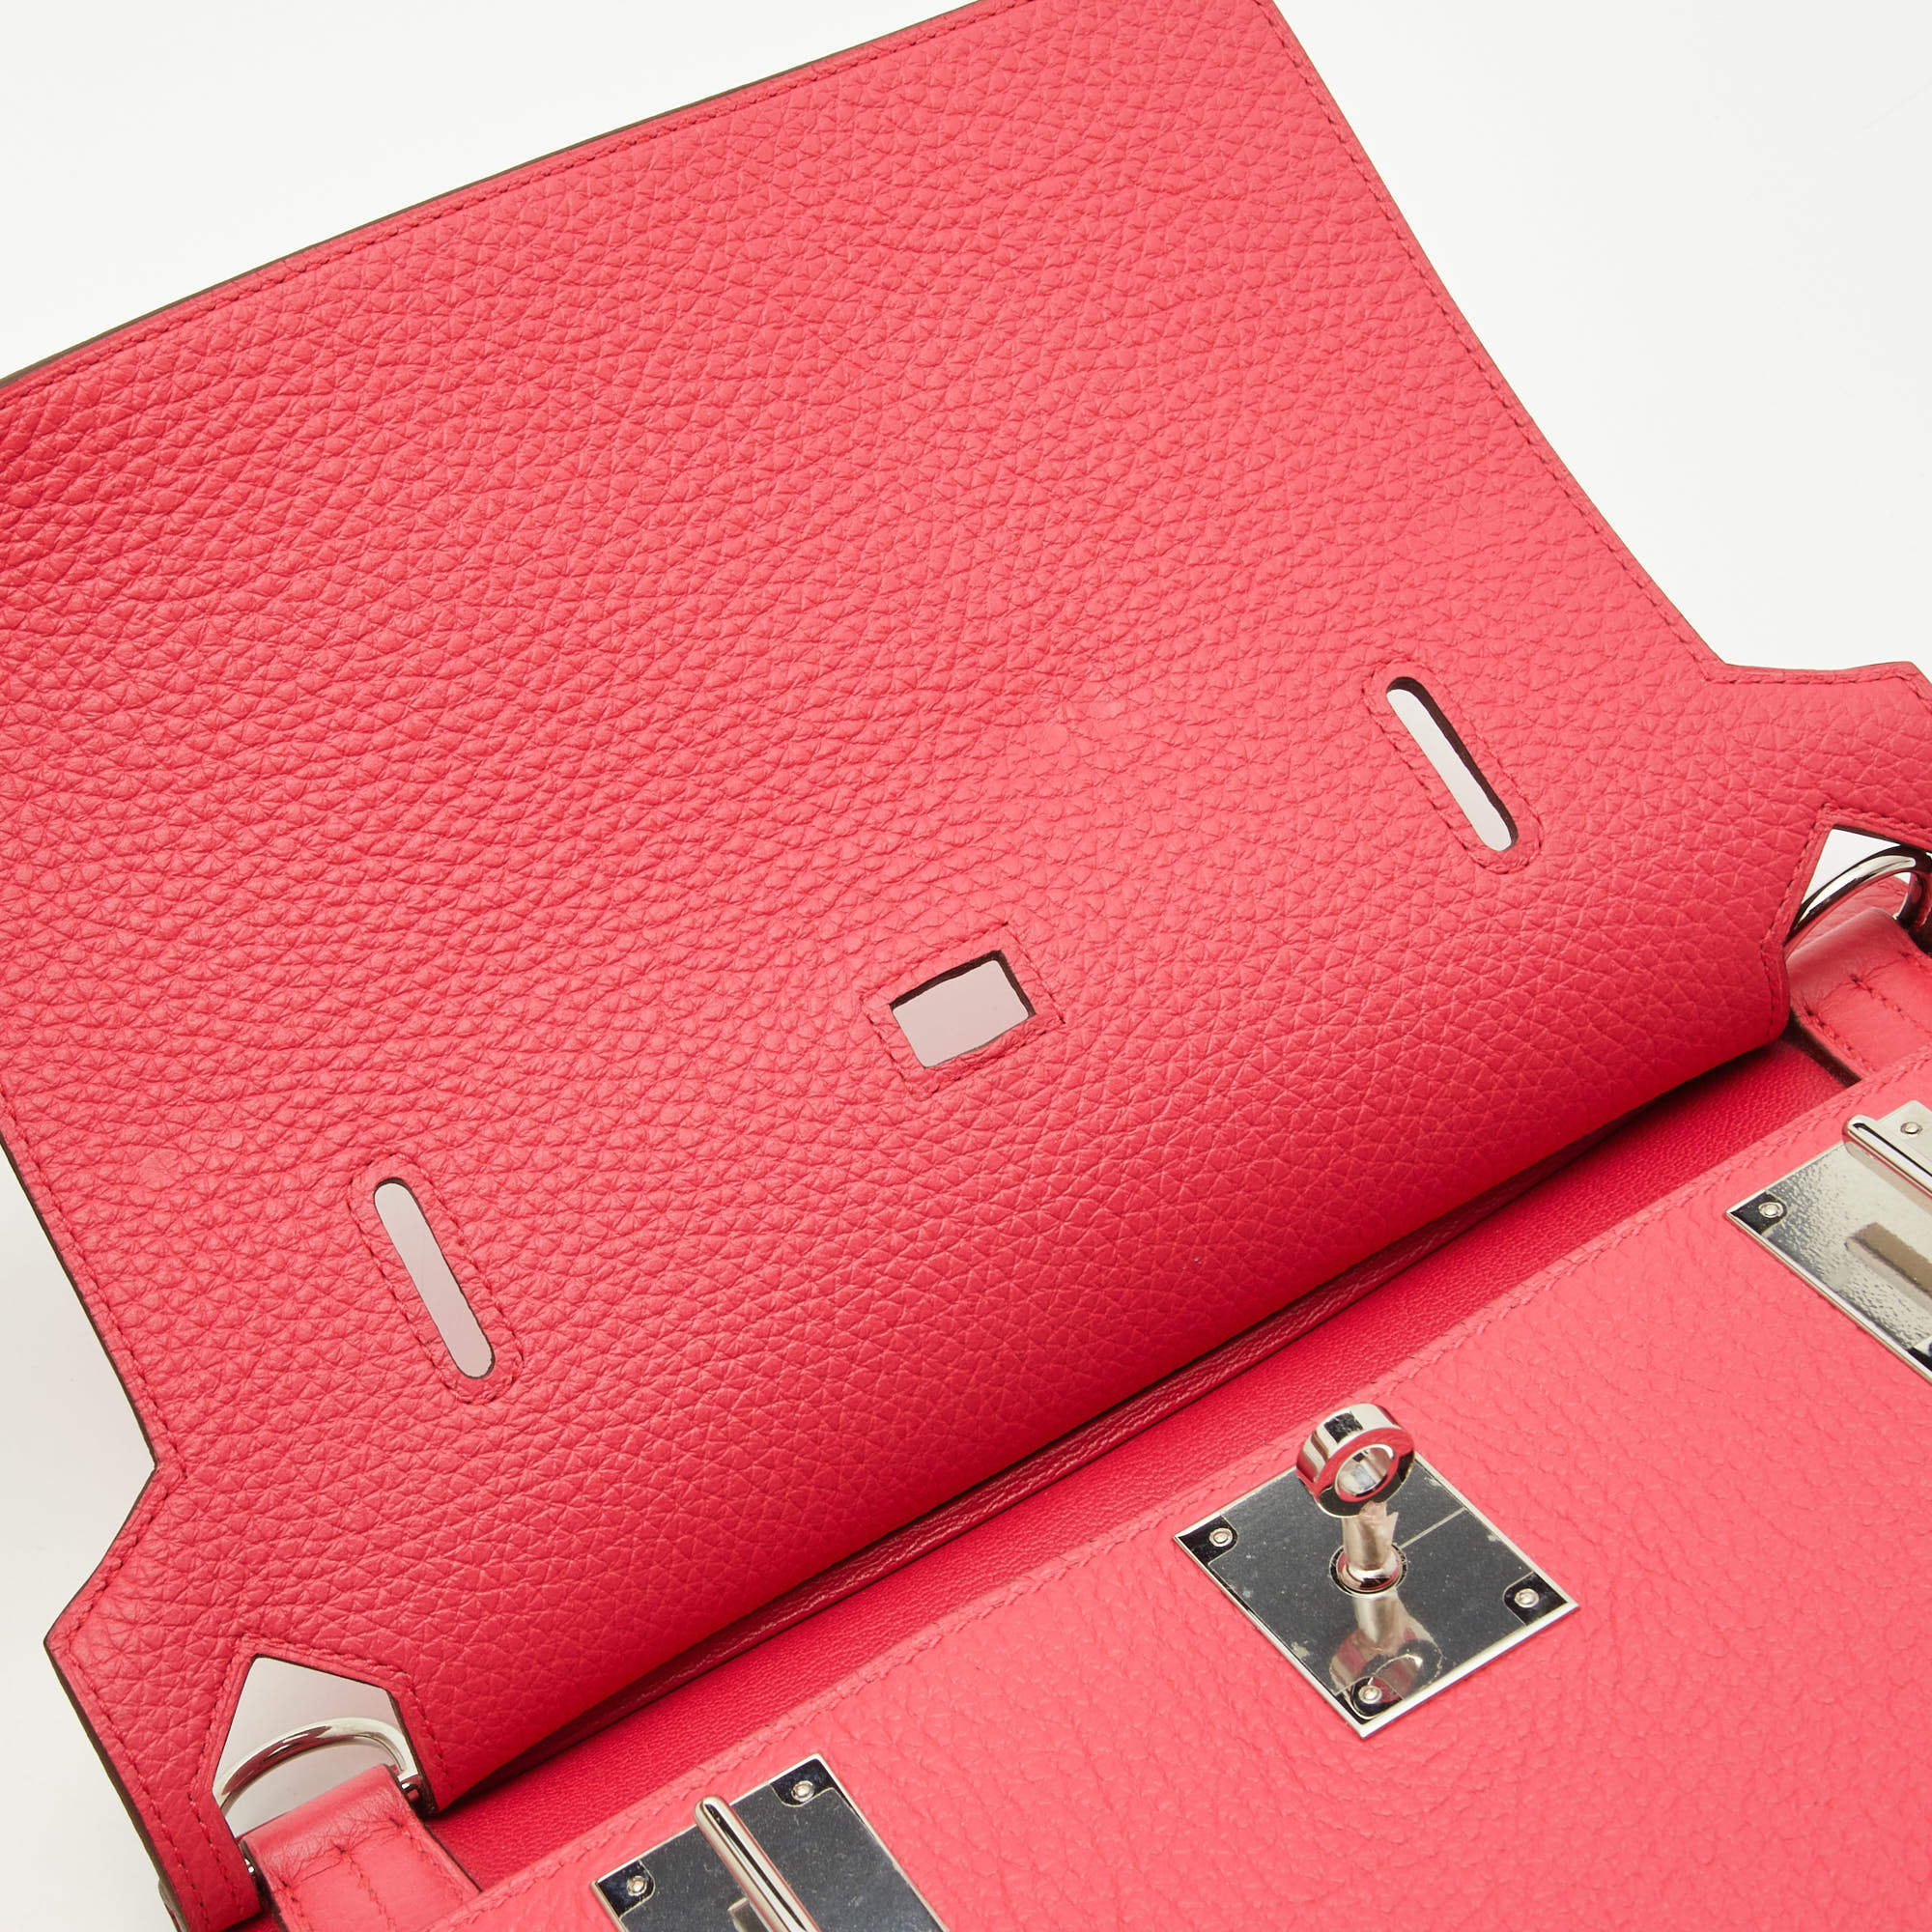 Hermès Halzan 25 In Rouge De Coeur And Rose Extreme Taurillon Clemence  Leather With Palladium Hardware in Pink